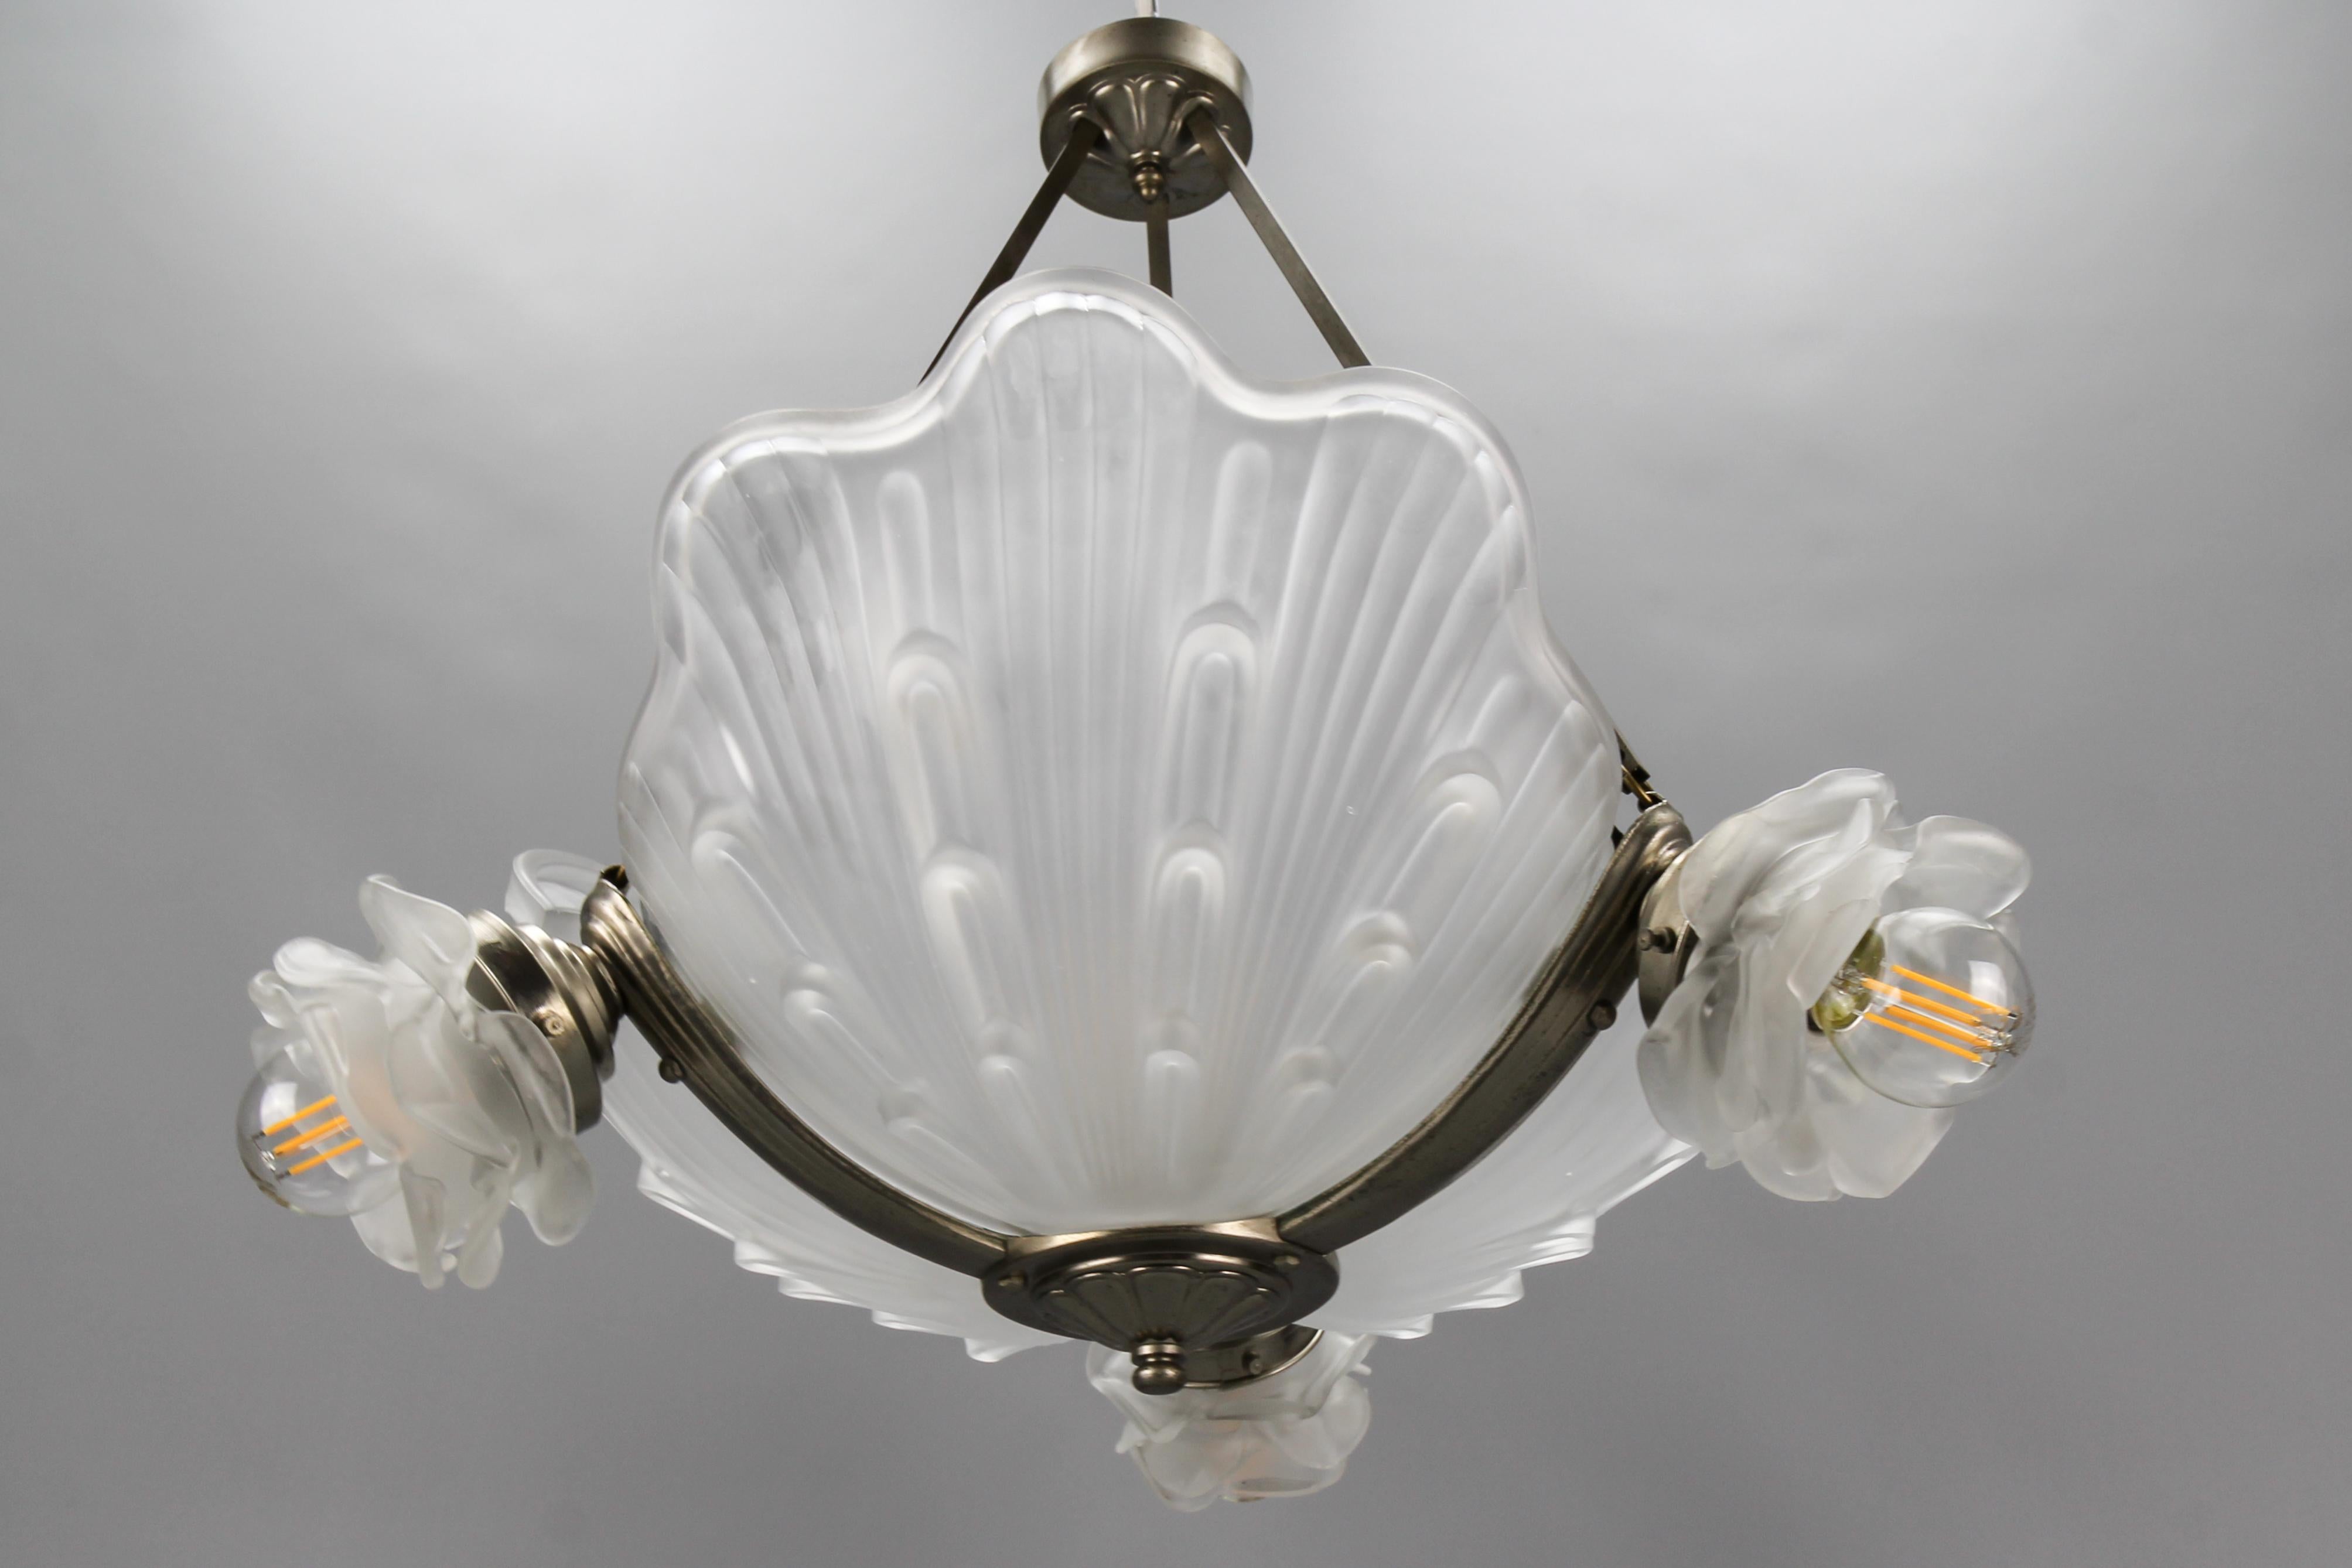 Art Deco four-light white frosted glass shell chandelier, France, circa the 1930s.
This beautiful French Art Deco chandelier features a nickel-plated brass frame with three white frosted glass shell-shaped lamp shades and three white frosted glass